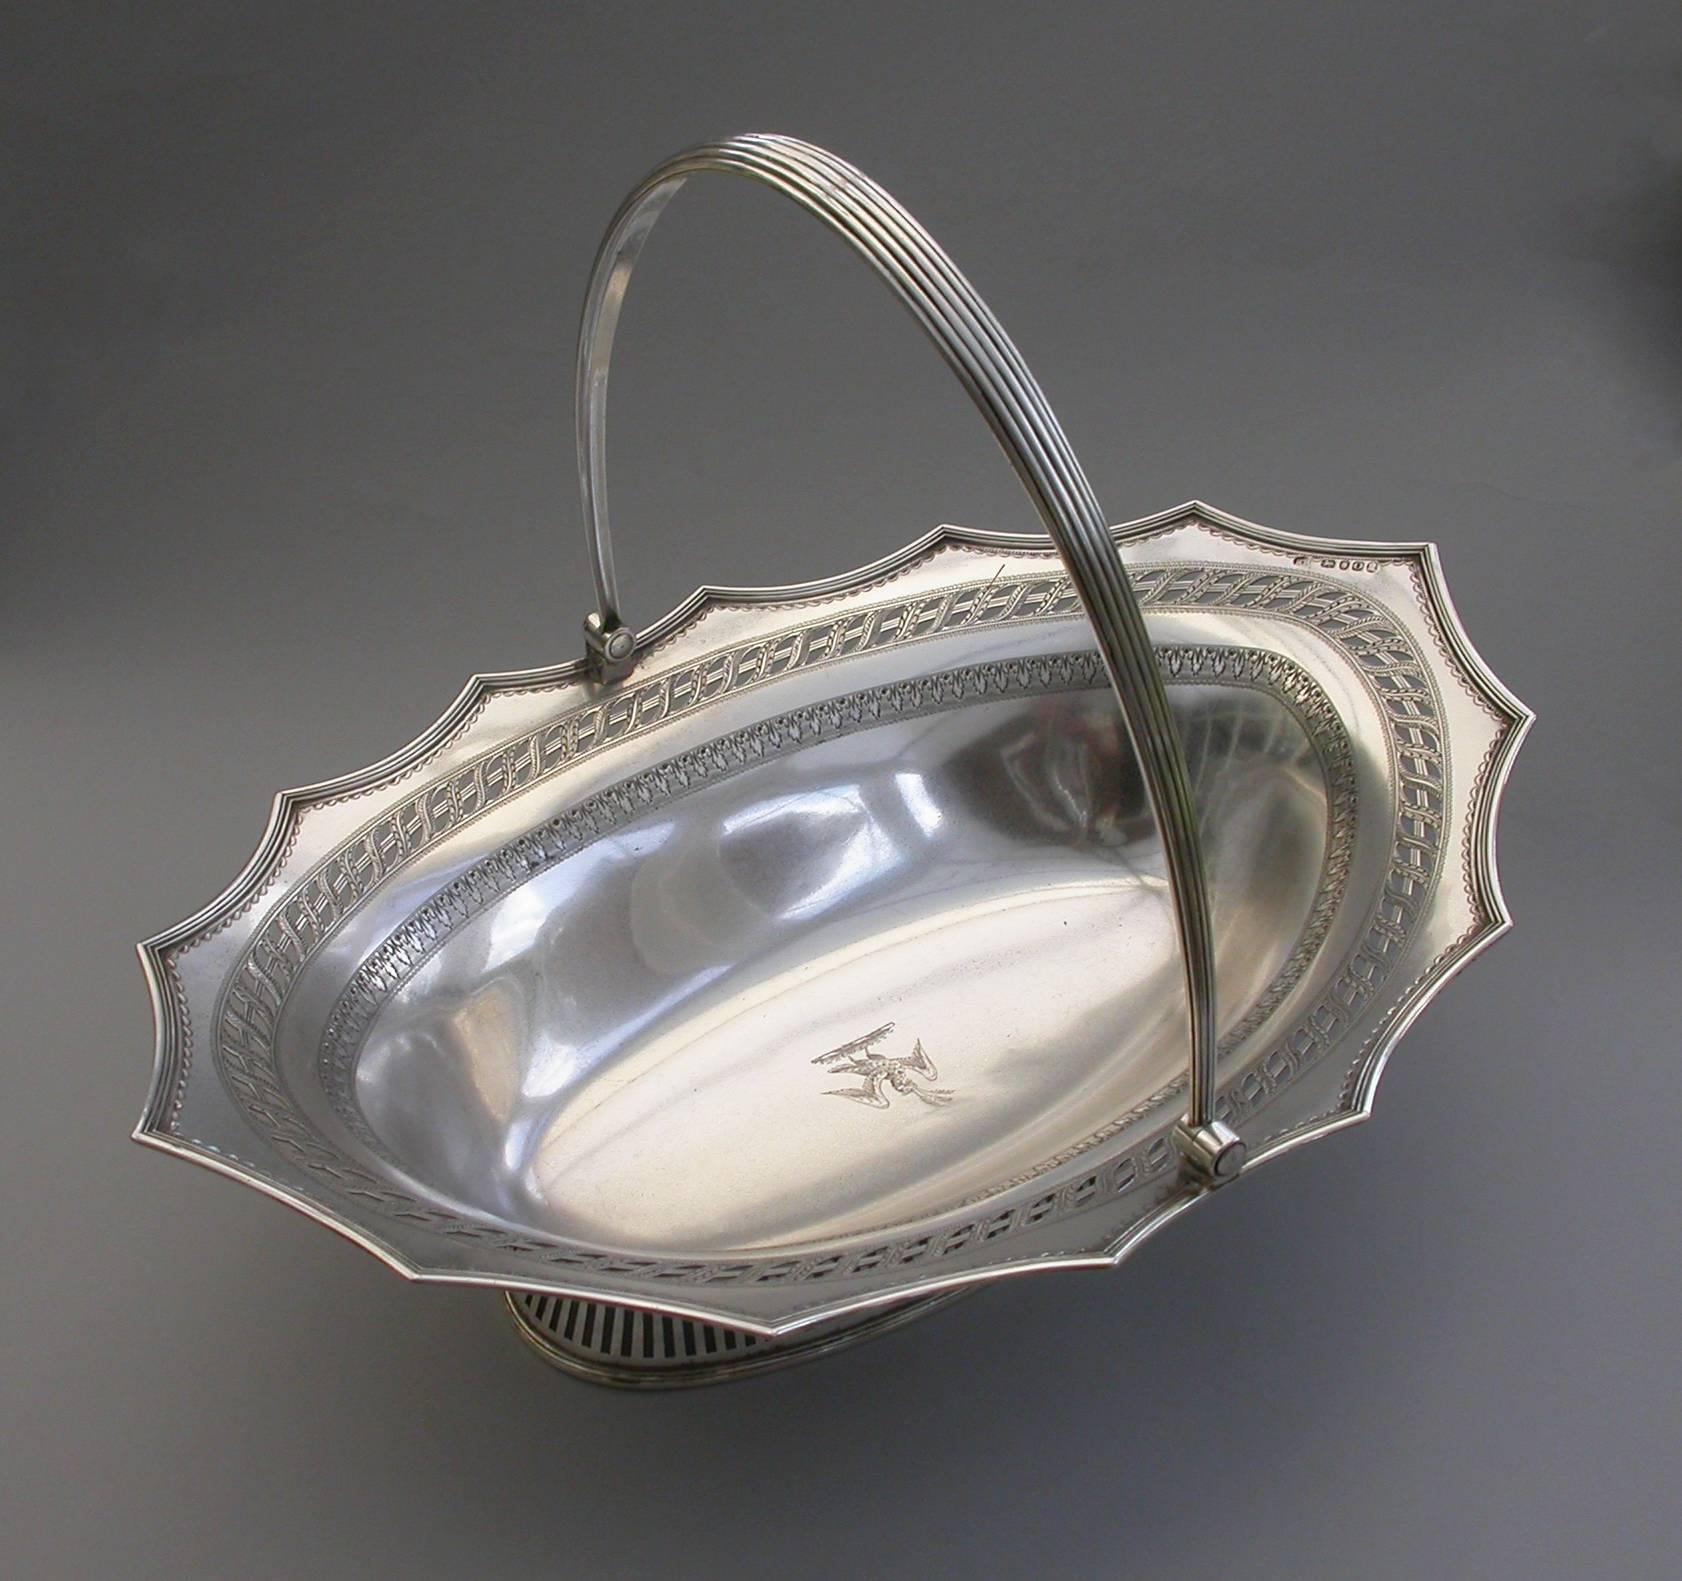 Late 18th Century George III Silver Swing Handled Cake Basket. by Robert Hennell, London, 1789